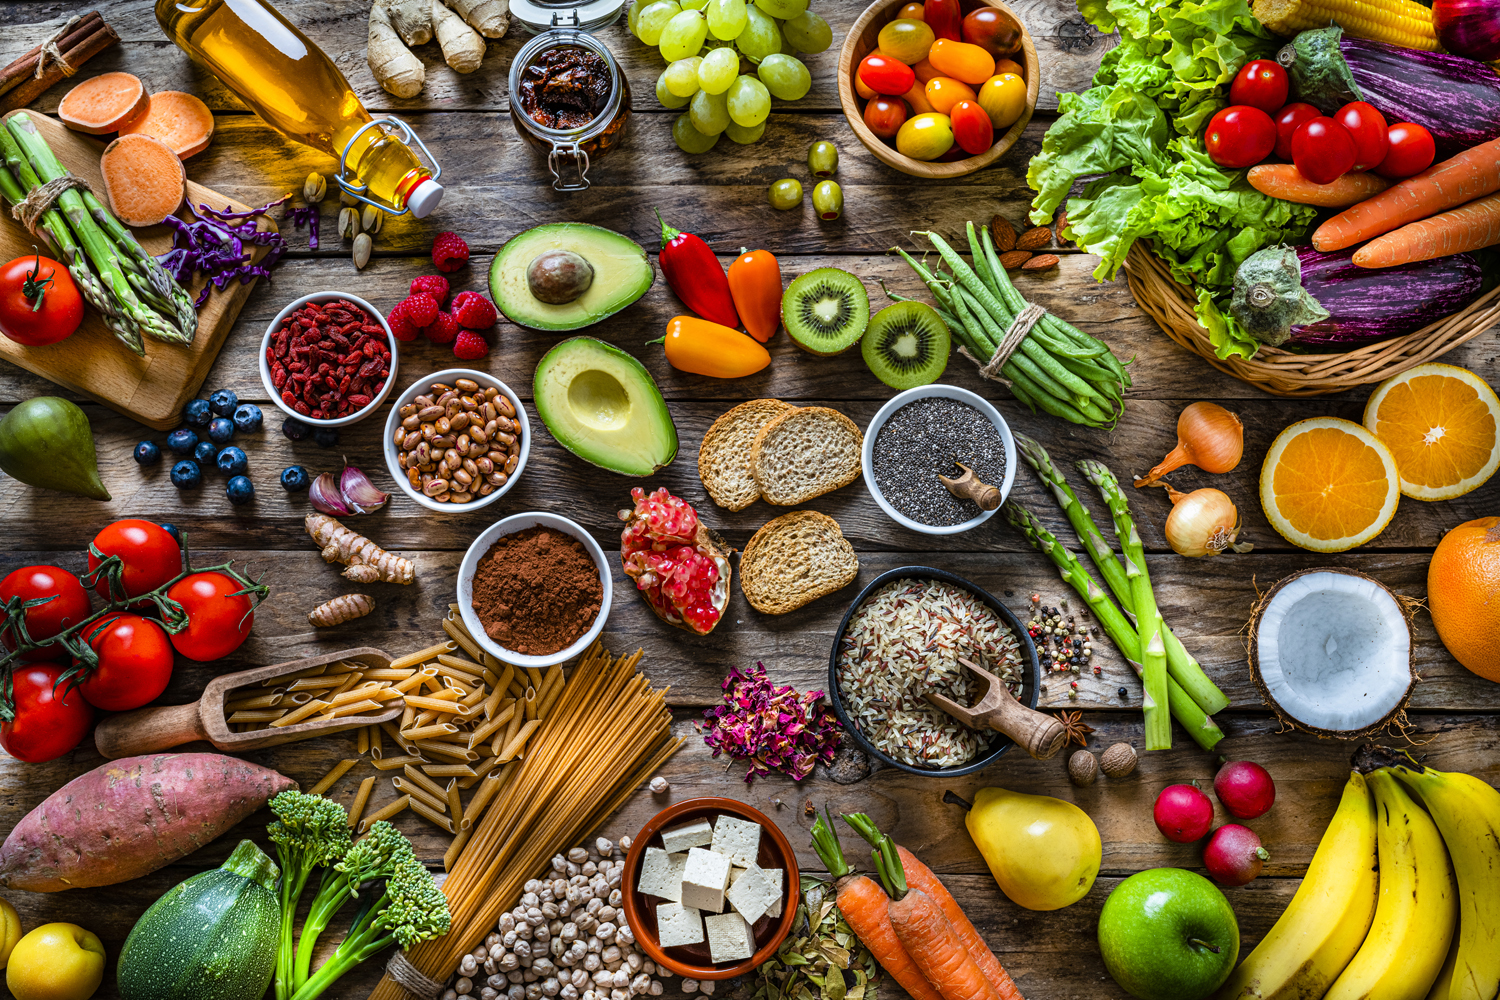 A bird's eye view of healthy foods on a table.